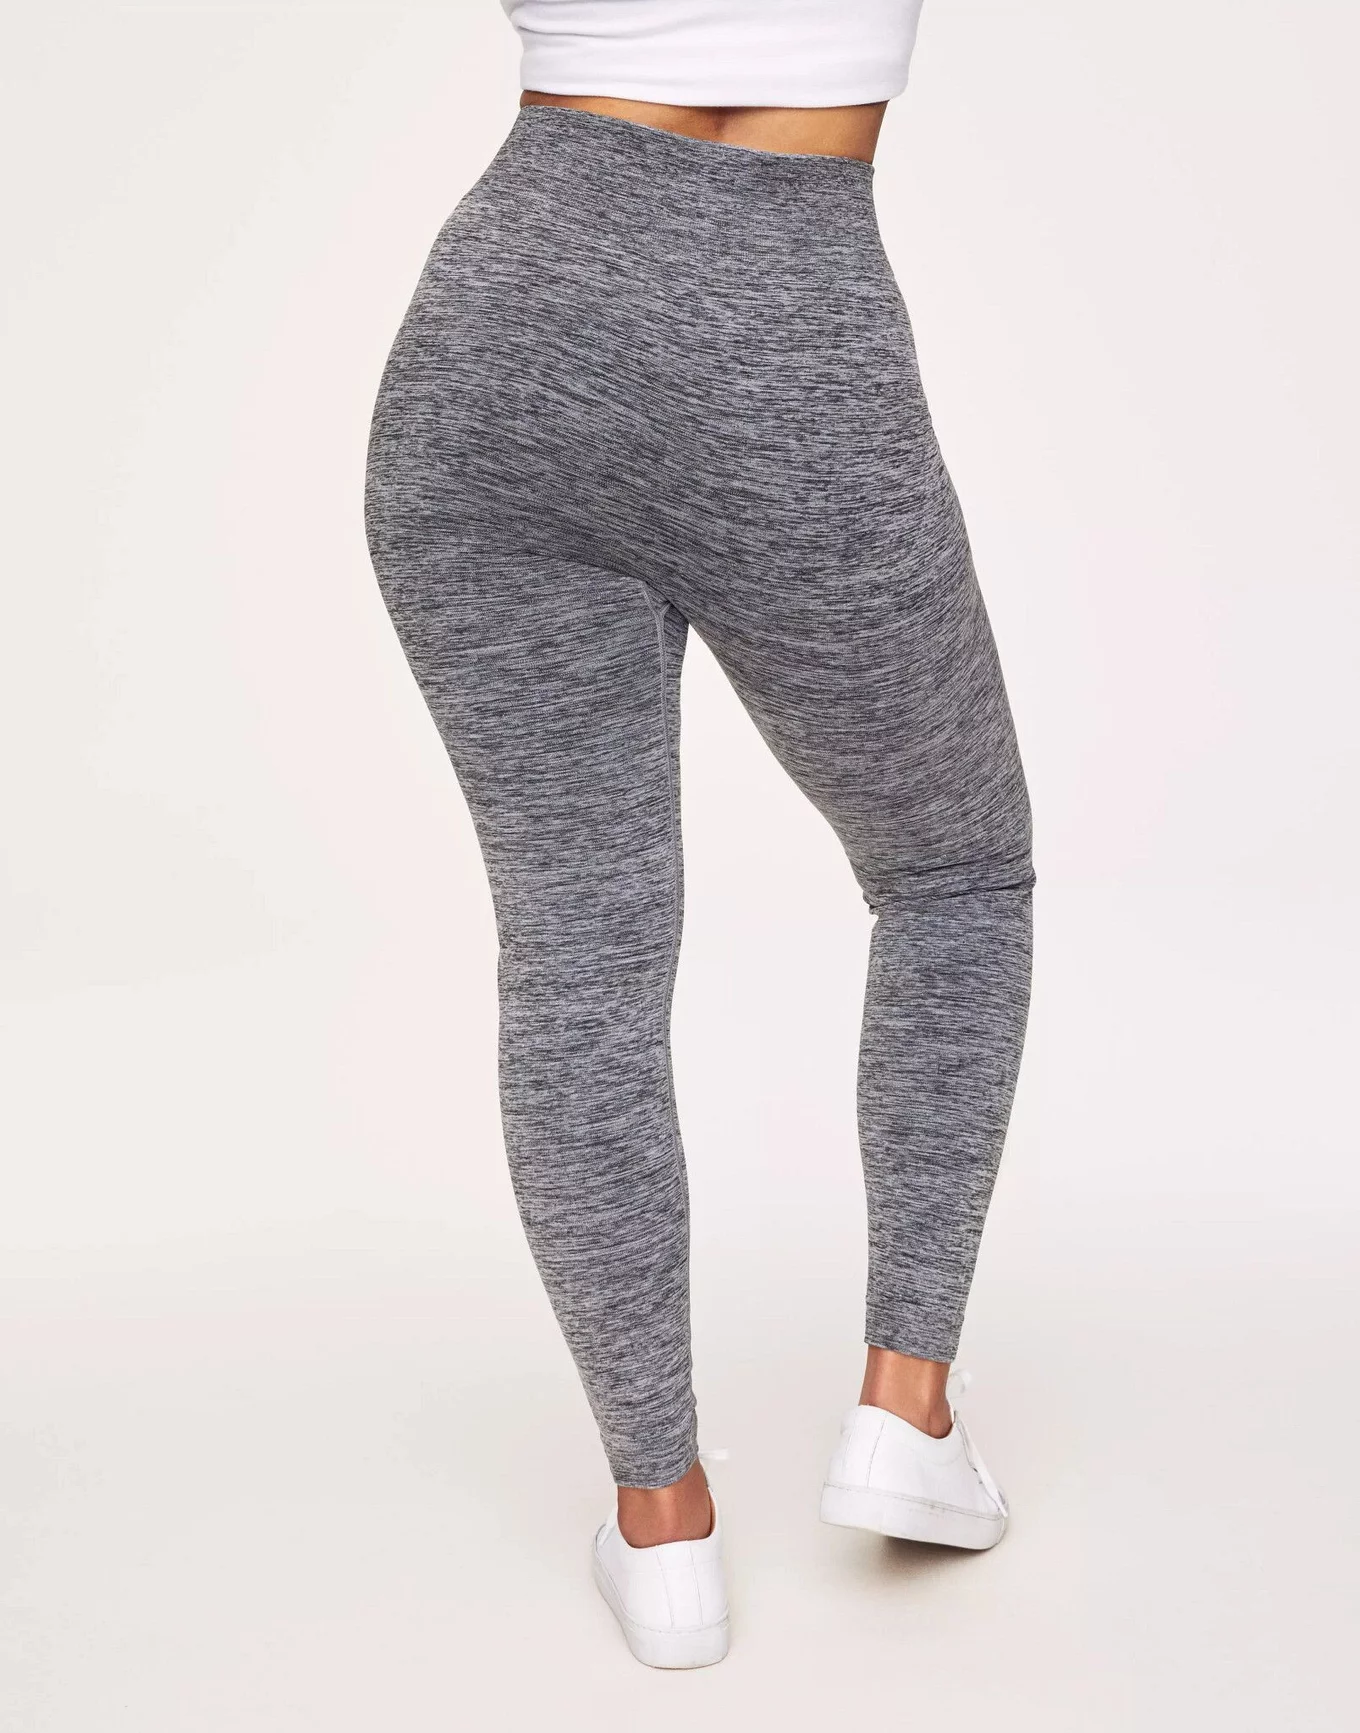 Shosho Grey Dot Matrix High Waisted Leggings Size undefined - $11 New With  Tags - From Emmie